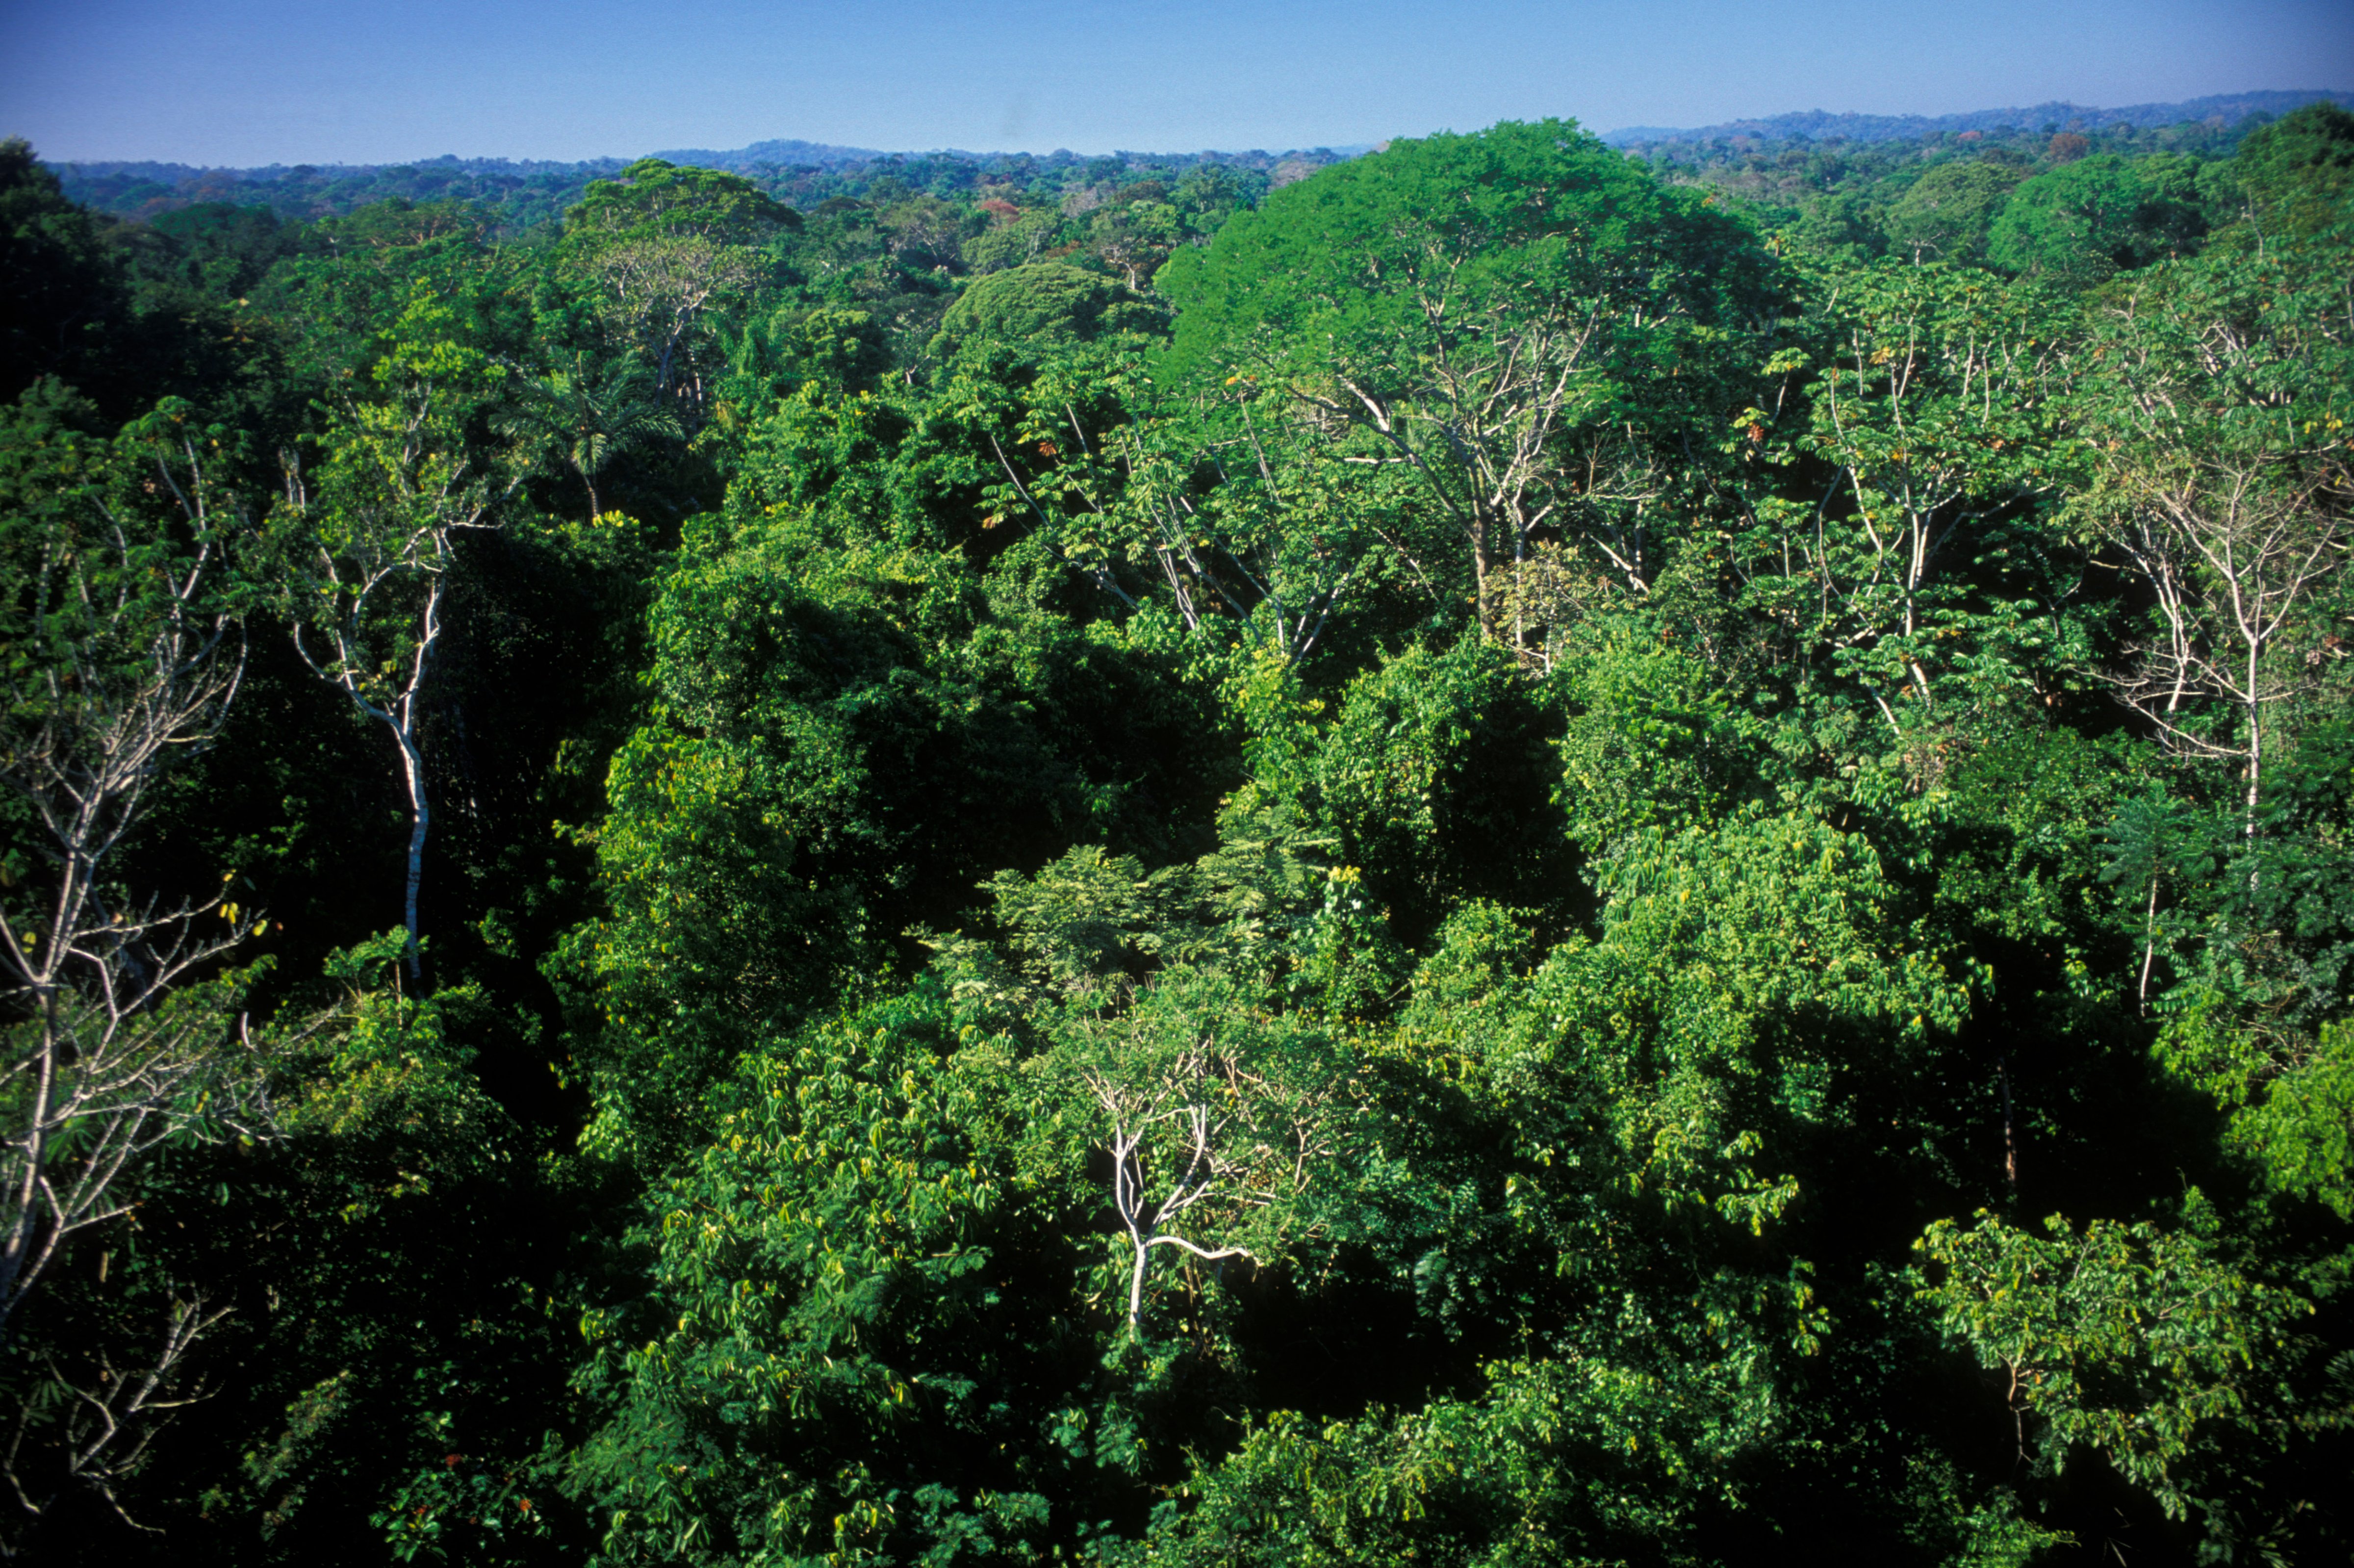 Easy to get lost—hard to be found: the dense canopy of the Amazon rainforest